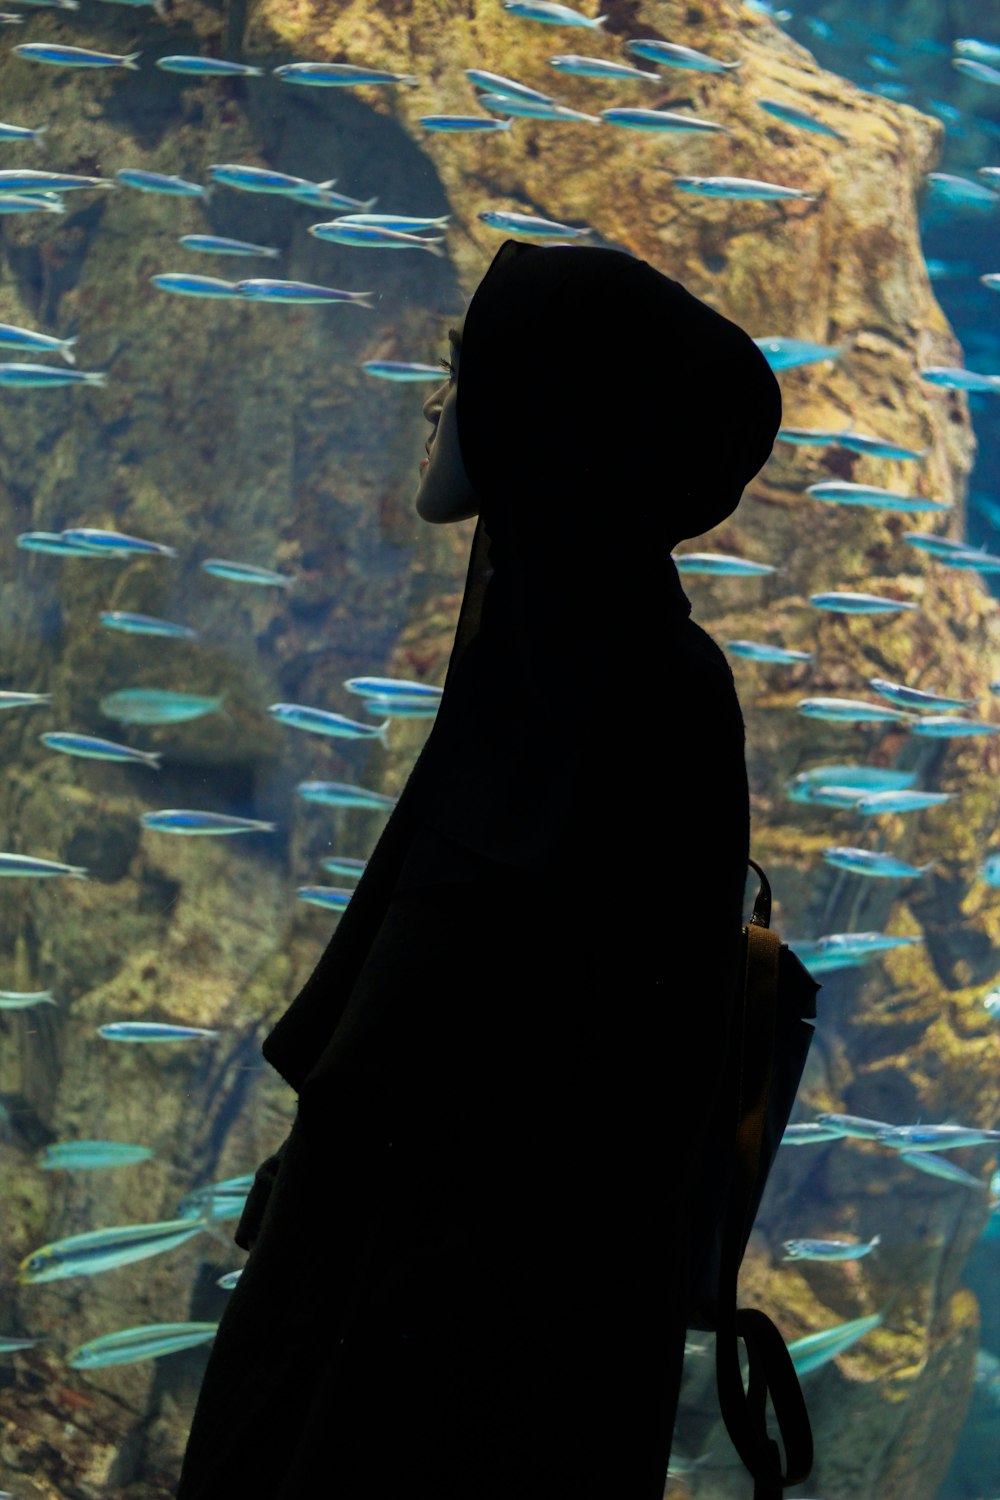 man in a hooded jacket by an aquarium